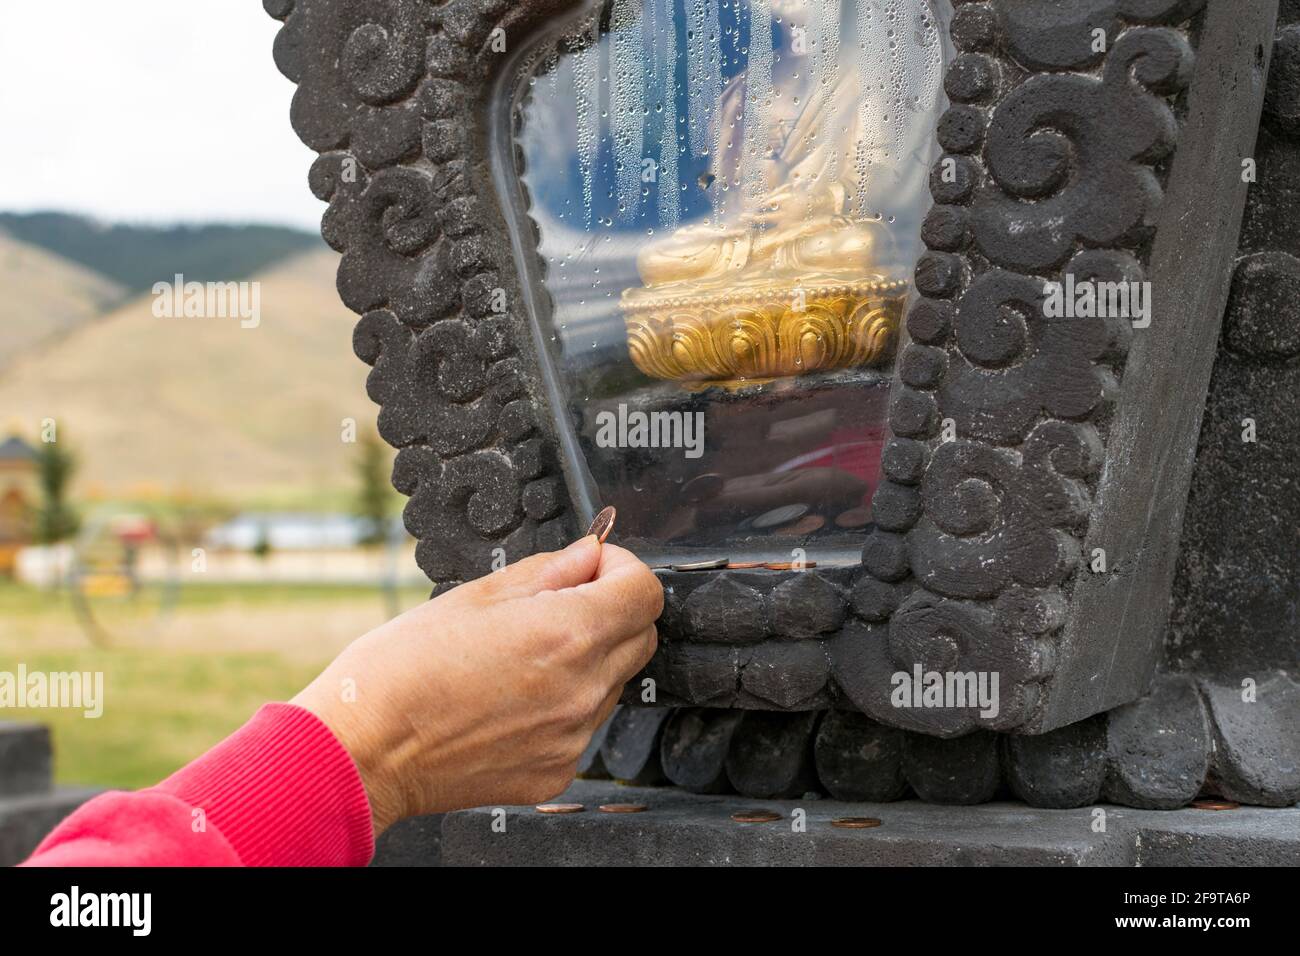 A visitor places a coin near an enclosed golden statue of Buddha for good luck at the Garden of One Thousand Buddhas in Arlee, Montana, USA Stock Photo